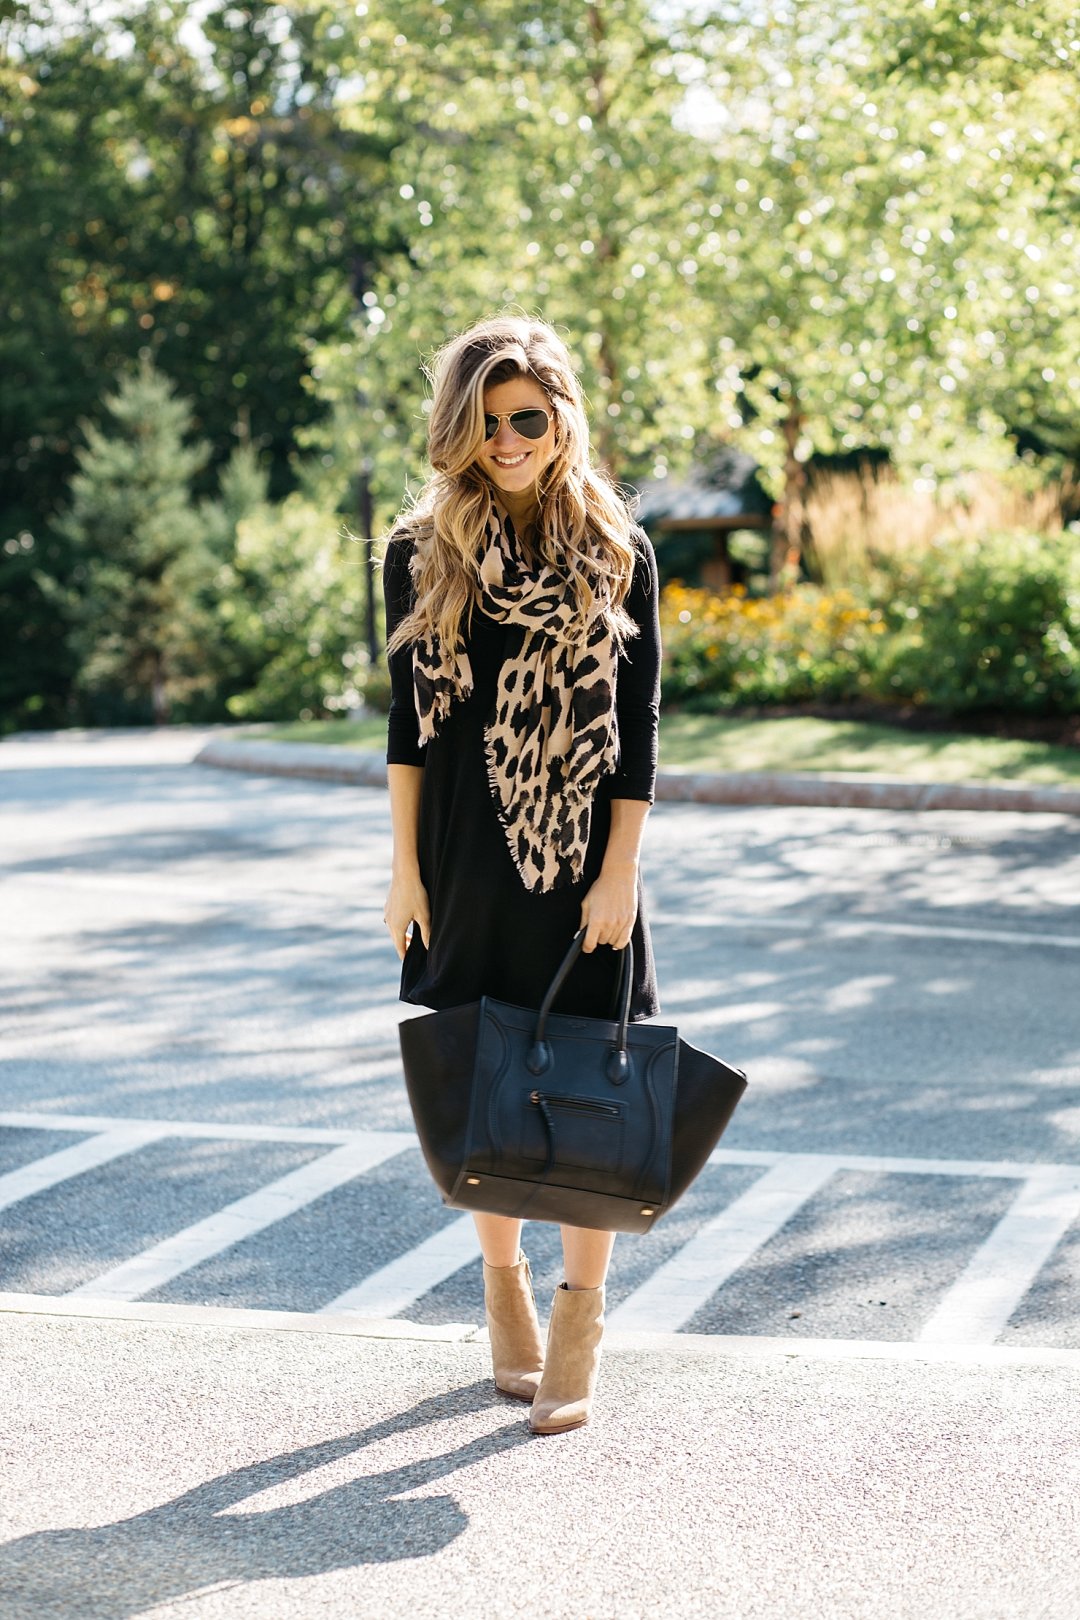 leopard print dress with boots